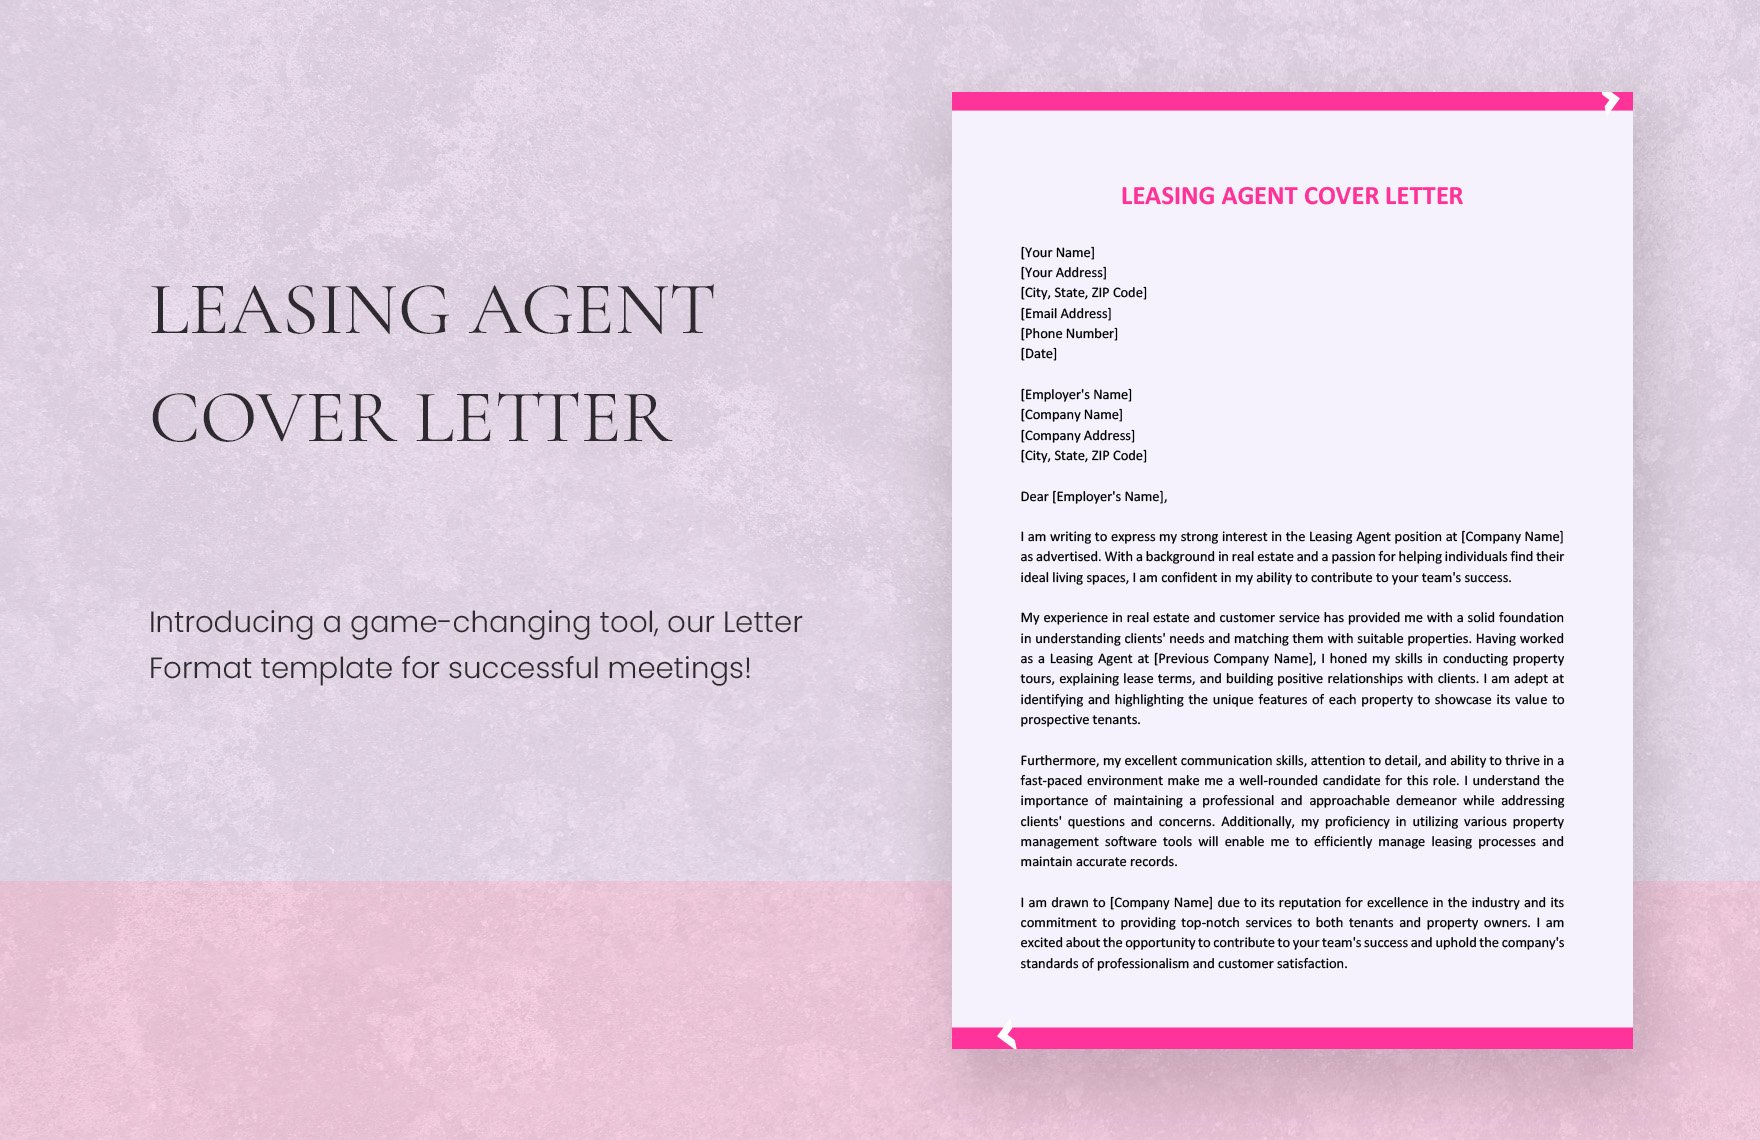 Leasing Agent Cover Letter in Word, Google Docs, PDF